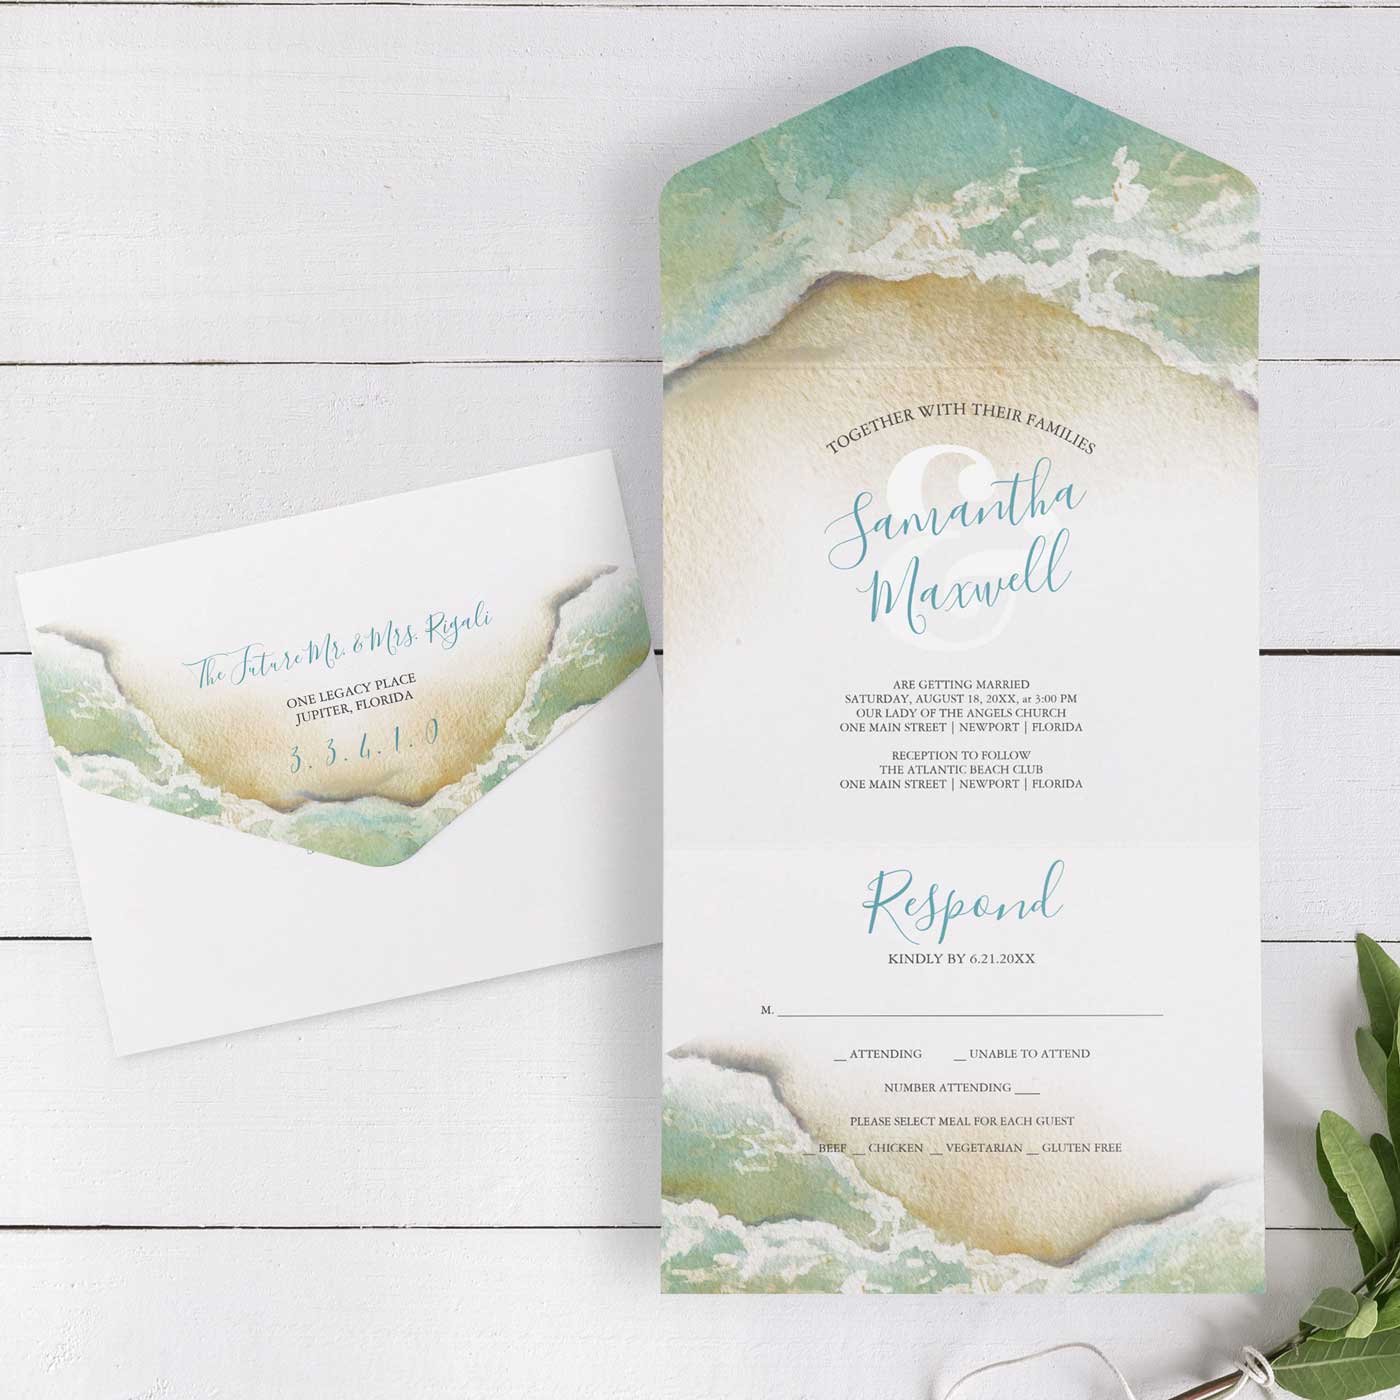 wedding invitations with rsvp cards feature unique watercolor shoreline art by Victoria Grigaliunas of Do Tell A Belle